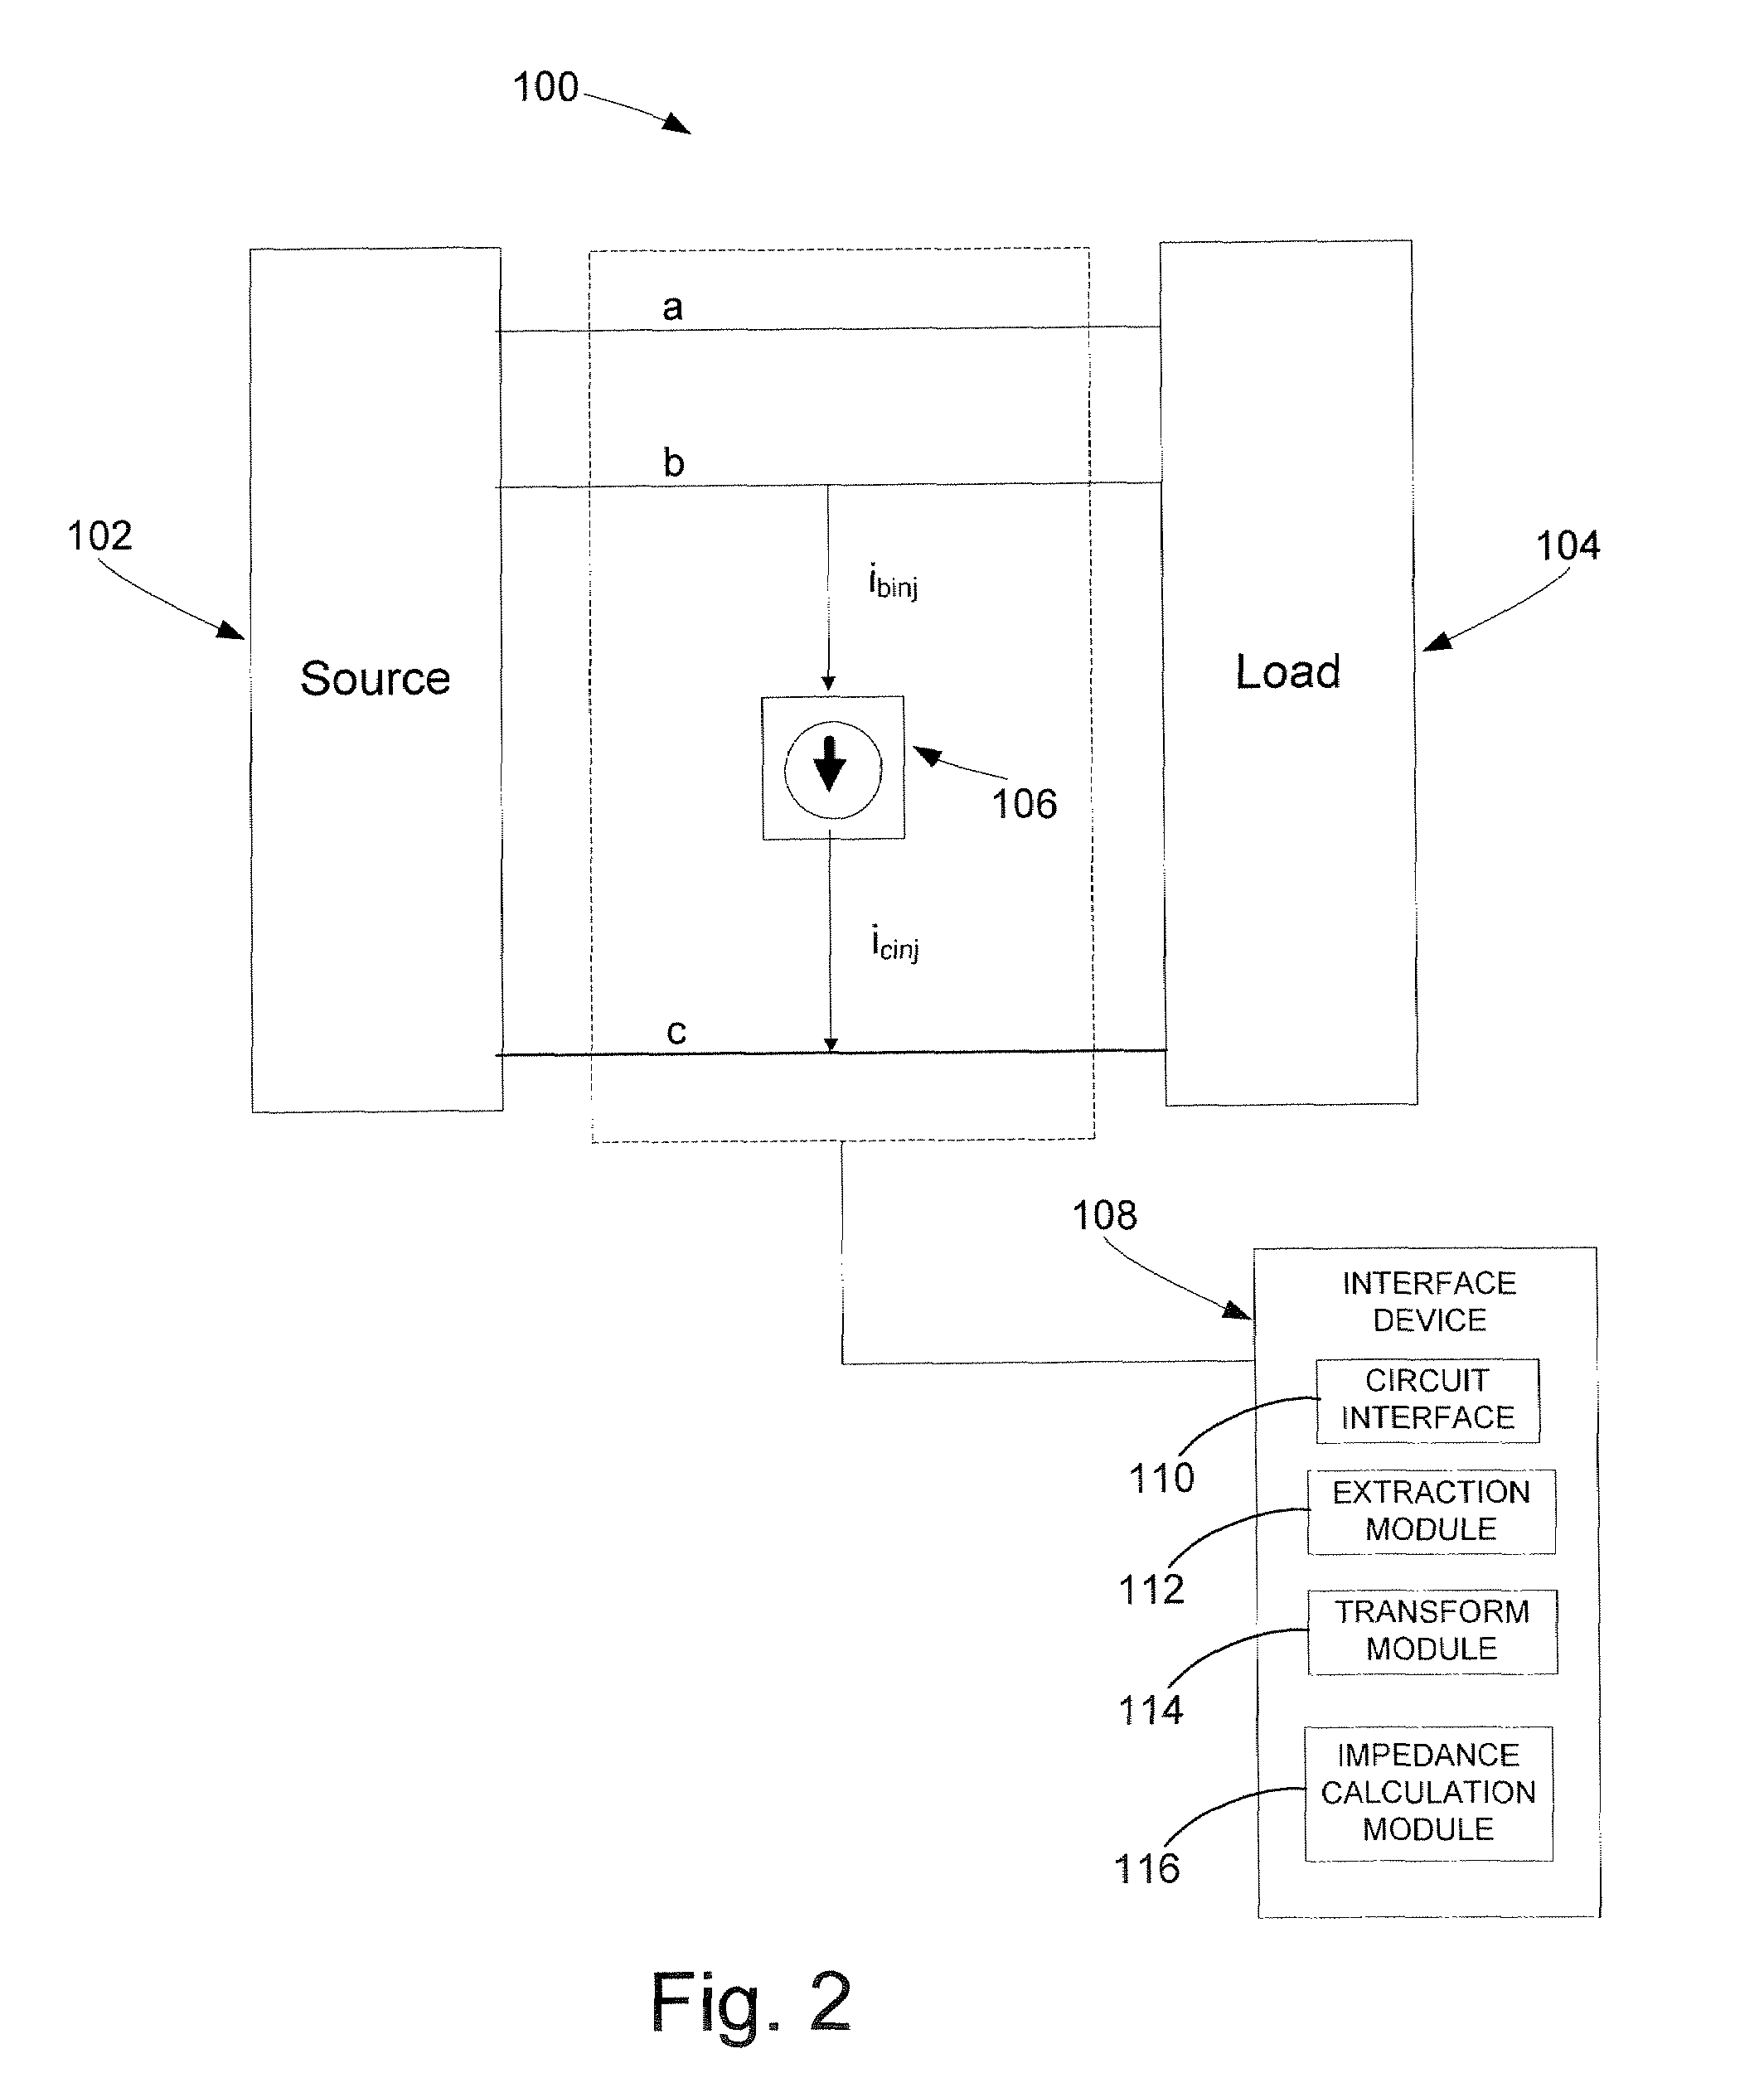 Impedance measurement using line-to-line current injection